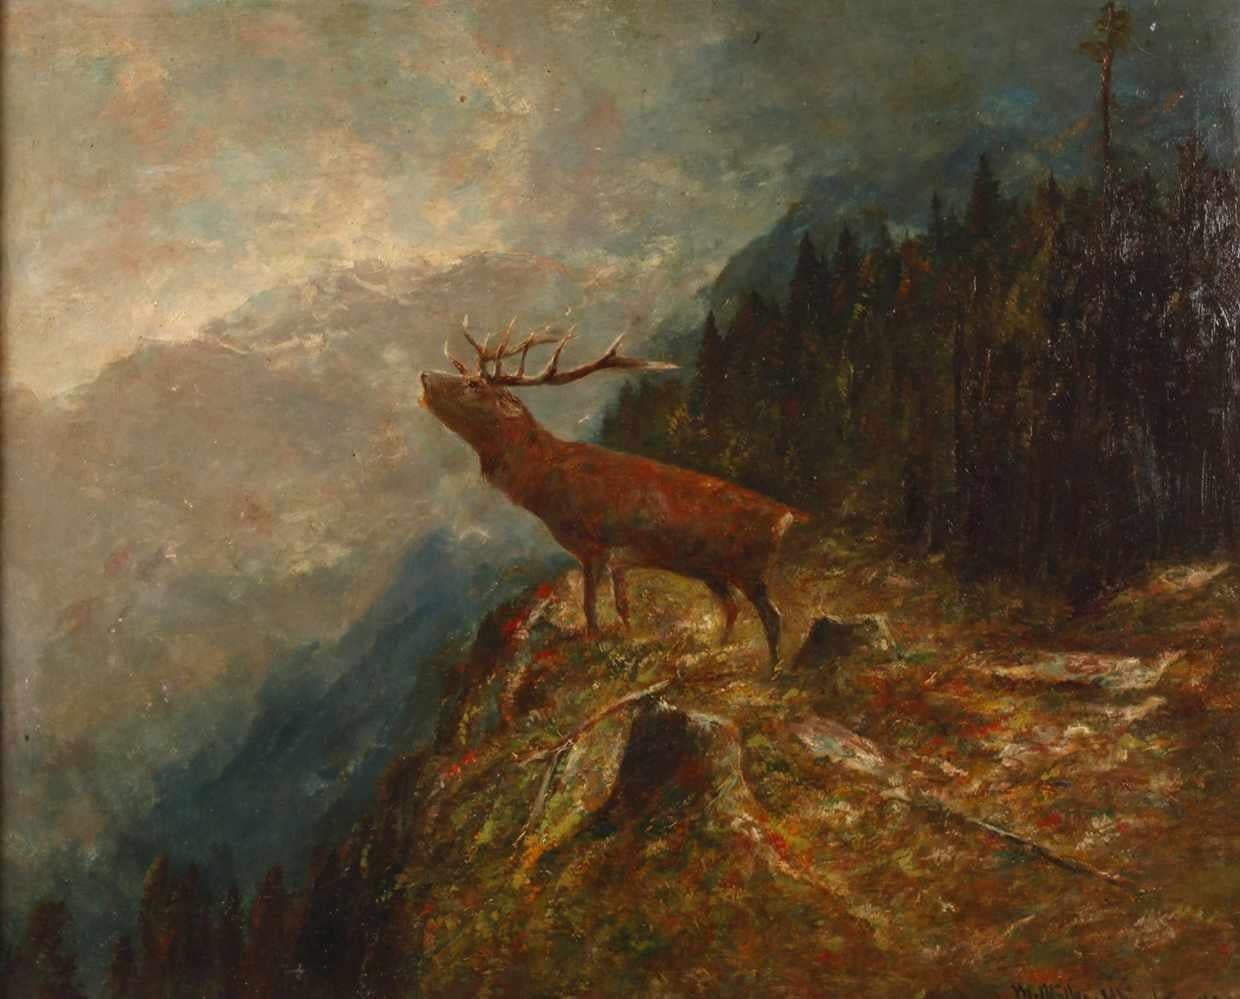 Moritz Muller Animal Painting - Stag Roaring in Mountain Landscape Large Signed Oil Painting on Canvas framed